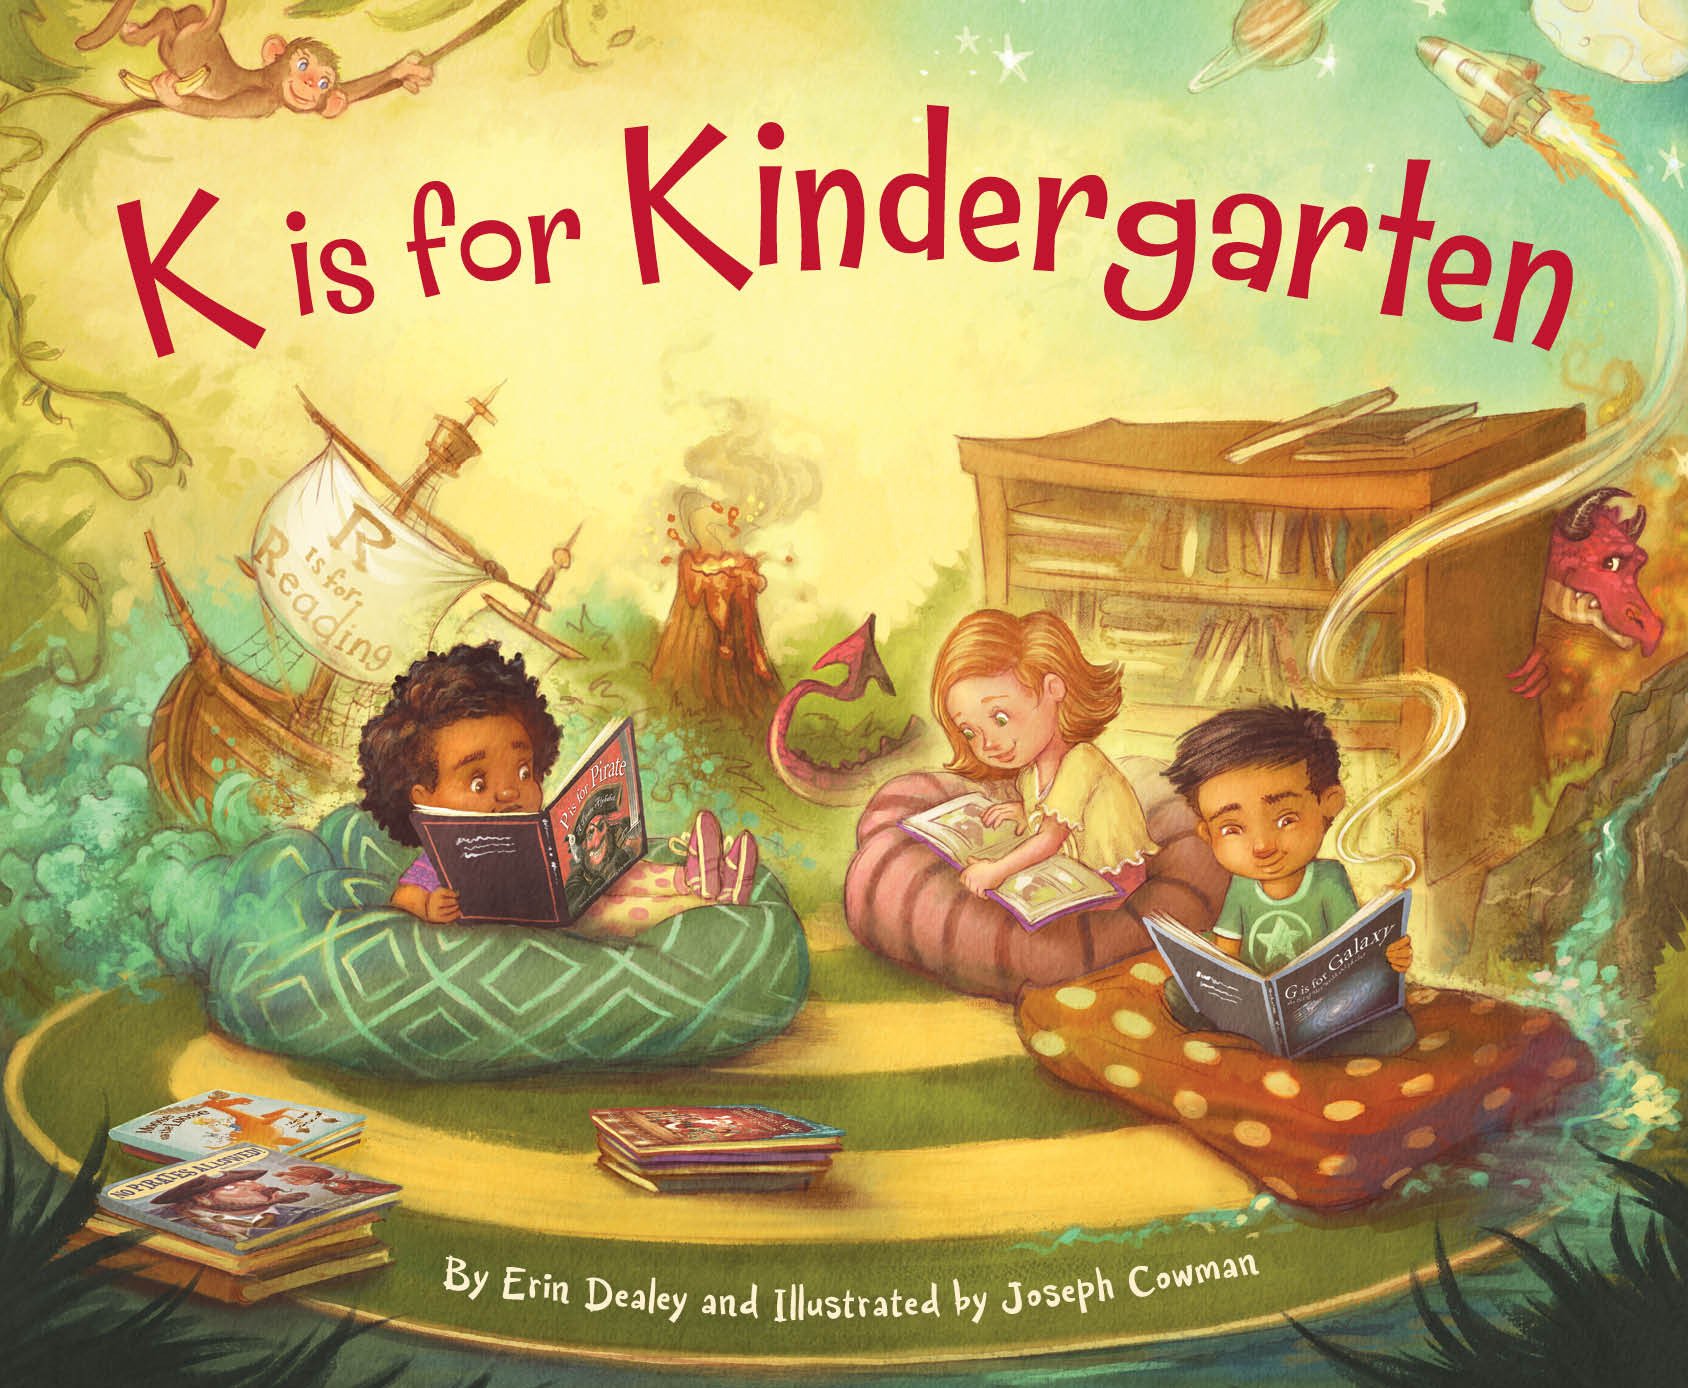 k-is-for-kindergarten-lessons-by-sandy